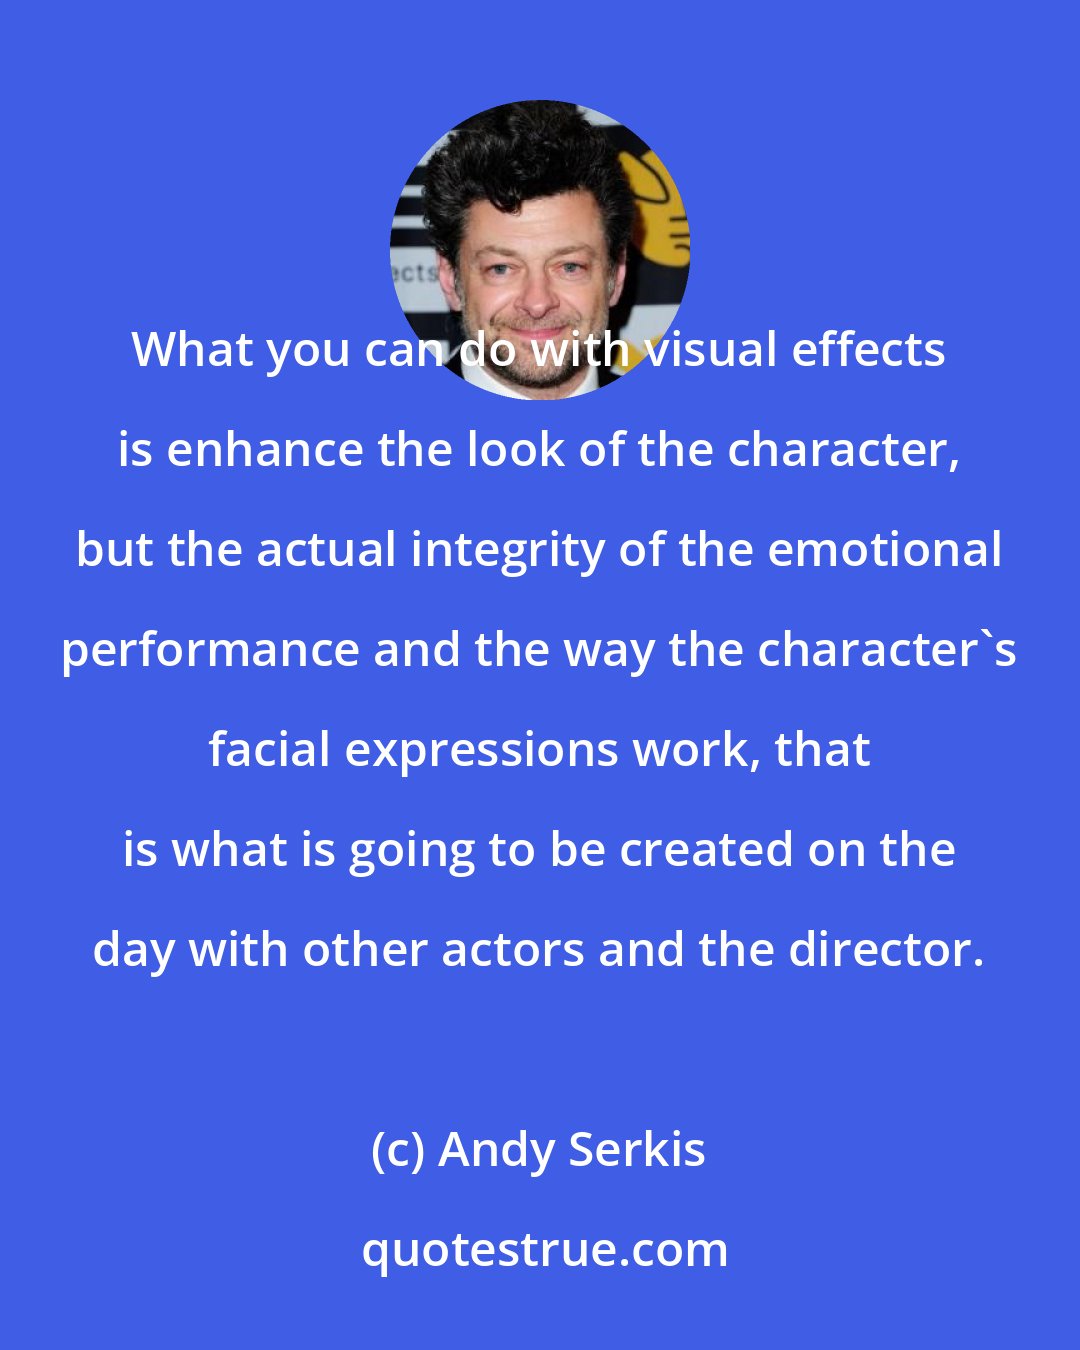 Andy Serkis: What you can do with visual effects is enhance the look of the character, but the actual integrity of the emotional performance and the way the character's facial expressions work, that is what is going to be created on the day with other actors and the director.